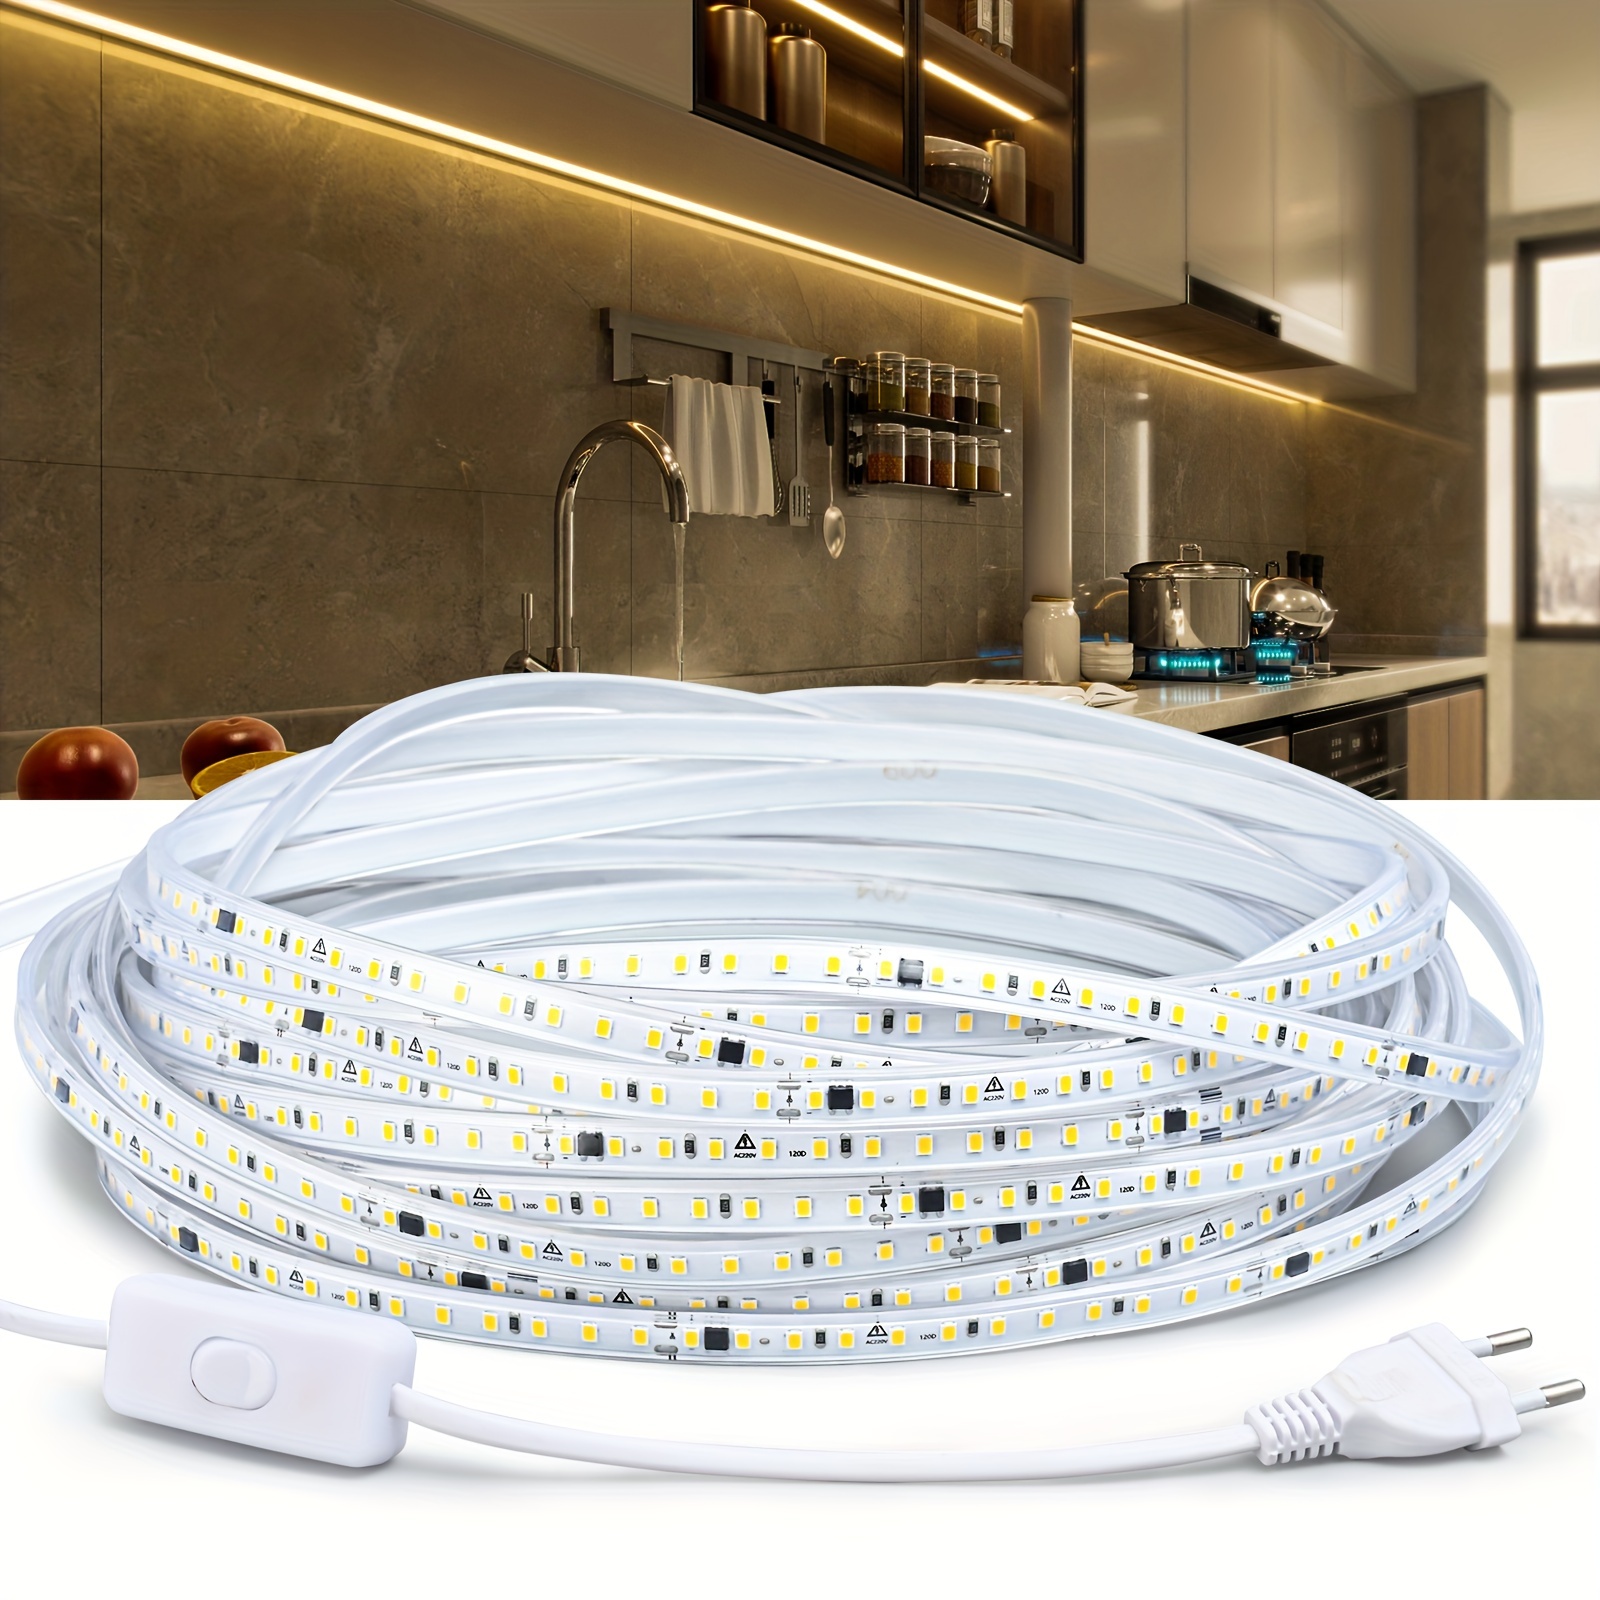 220v Waterproof Led Strip Light, High Brightness 120leds/m For Home Decoration Kitchen Outdoor Garden Led Light With Switch